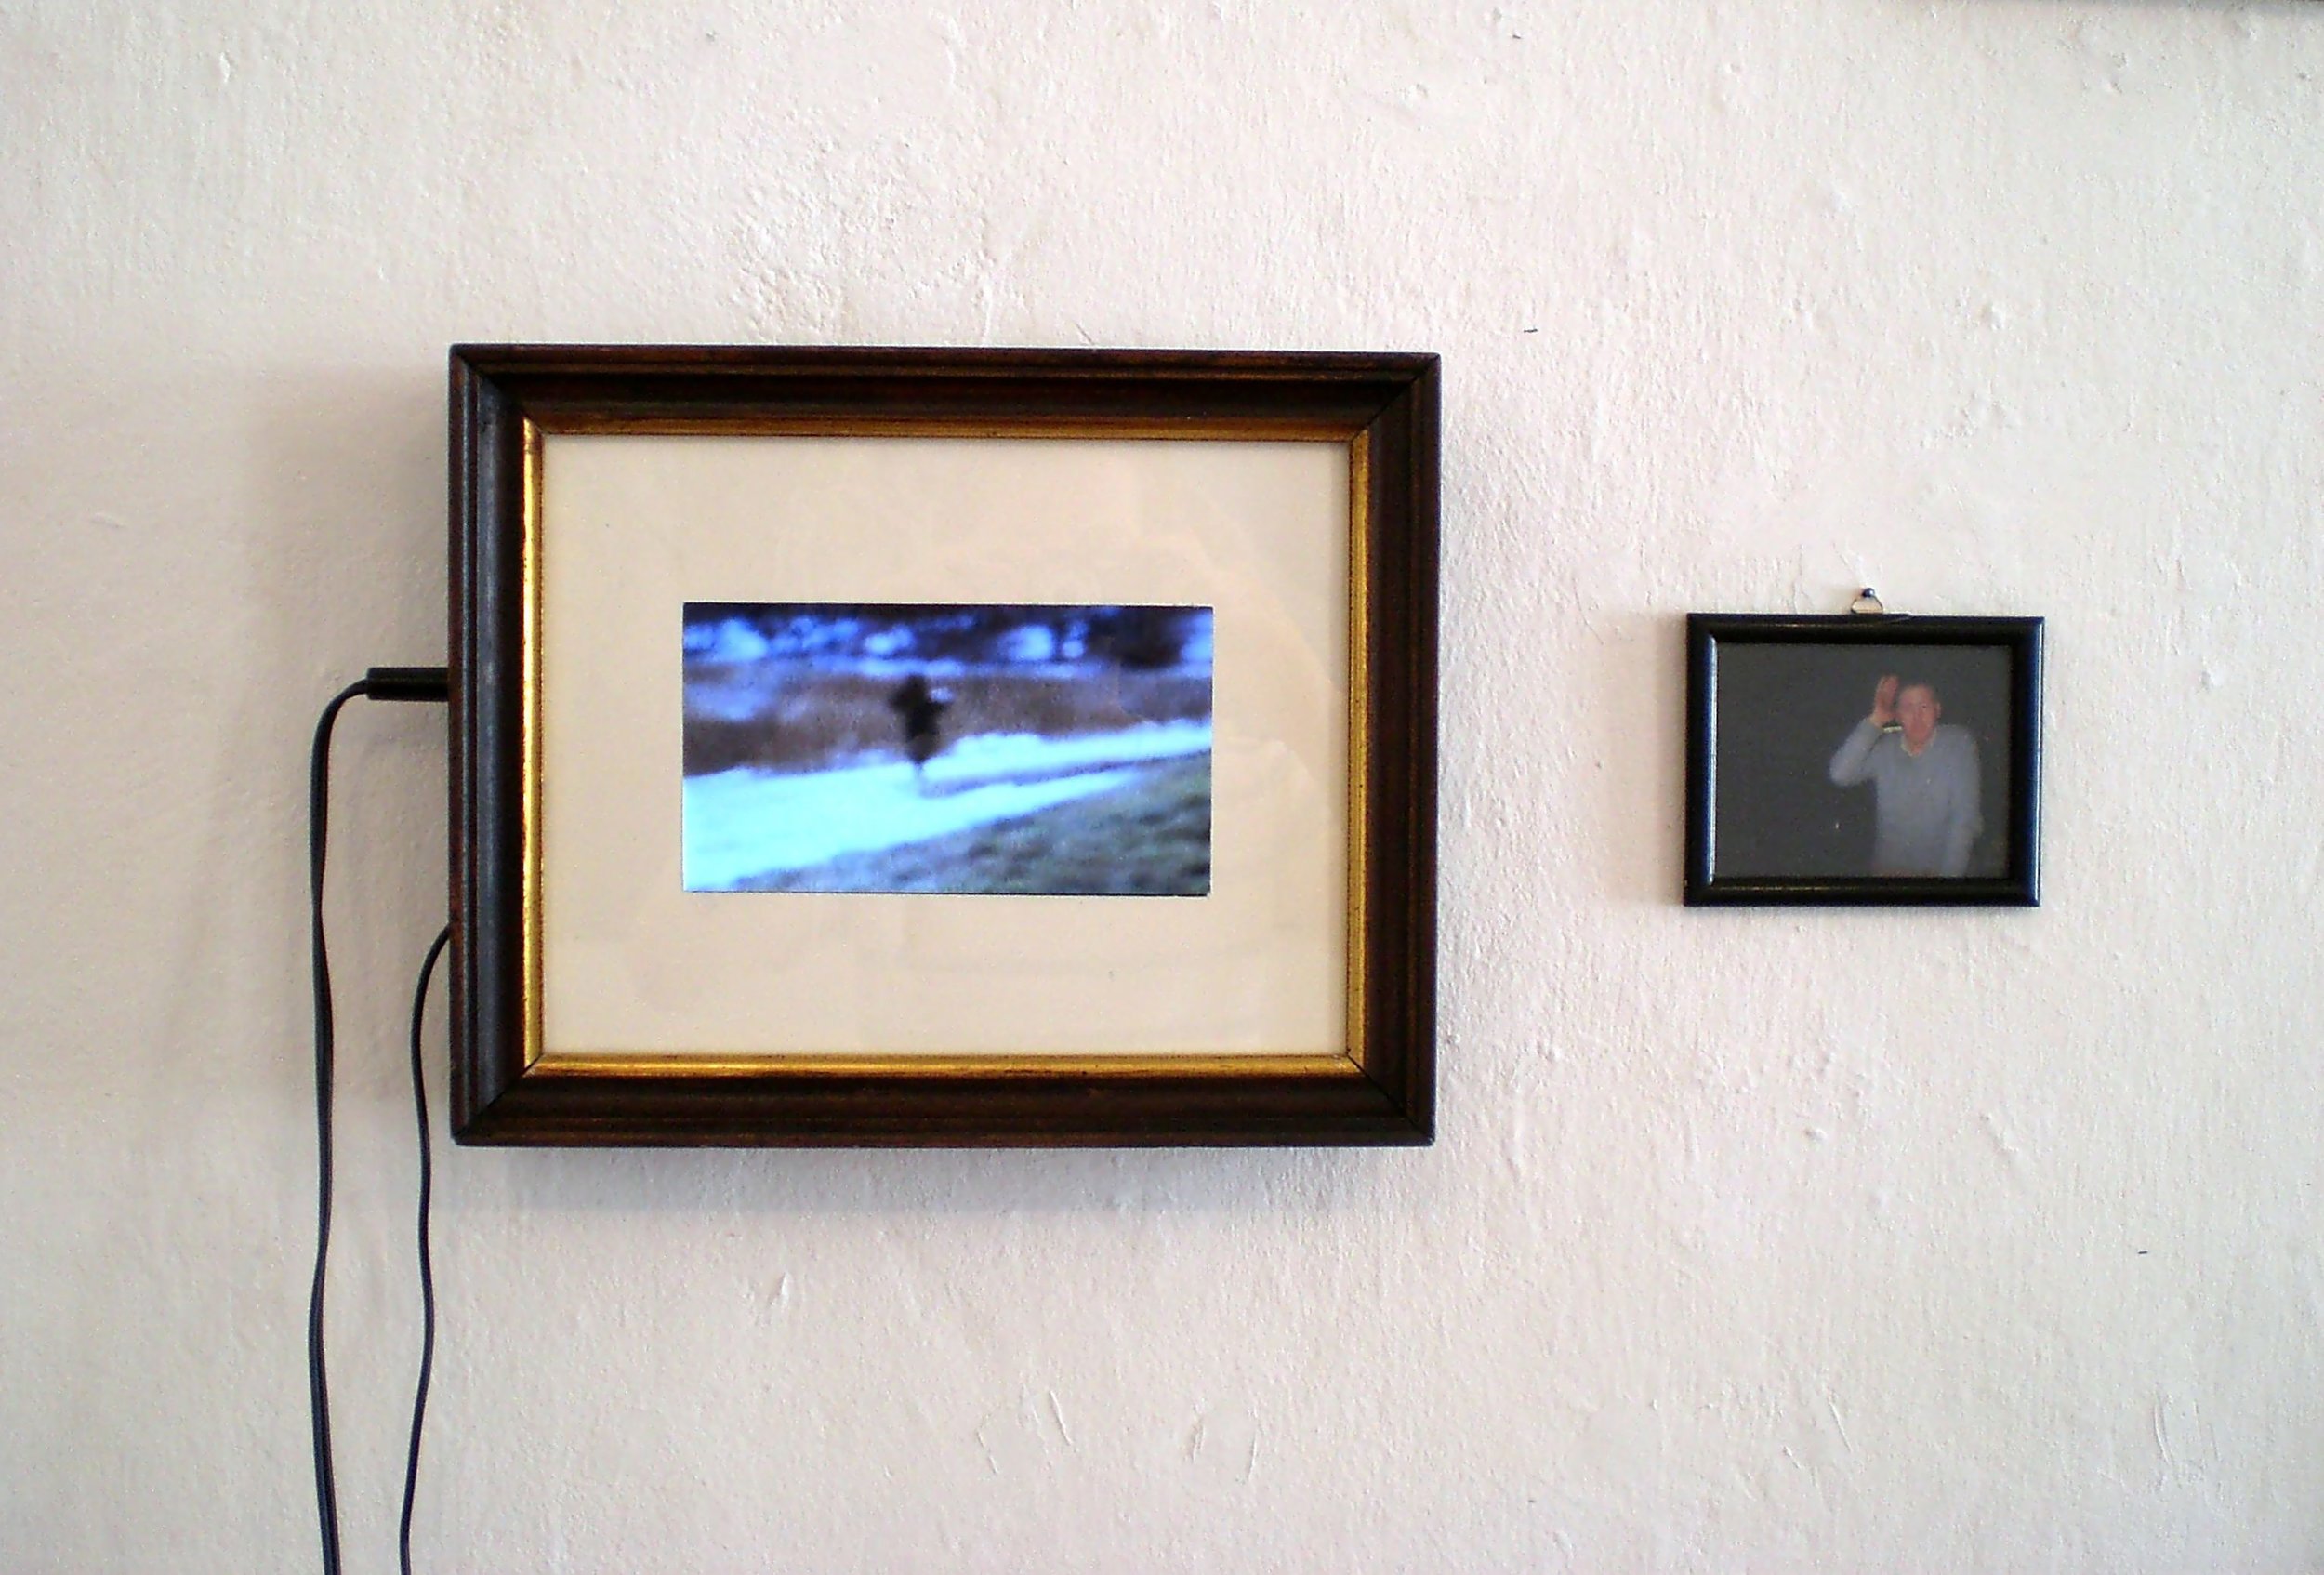 Familiensilber, Galerie3, photos of my grandaddy and his bicycle 100%, 8mm film, myself as grandaddy playing the quetschn, 2012  (2).jpg